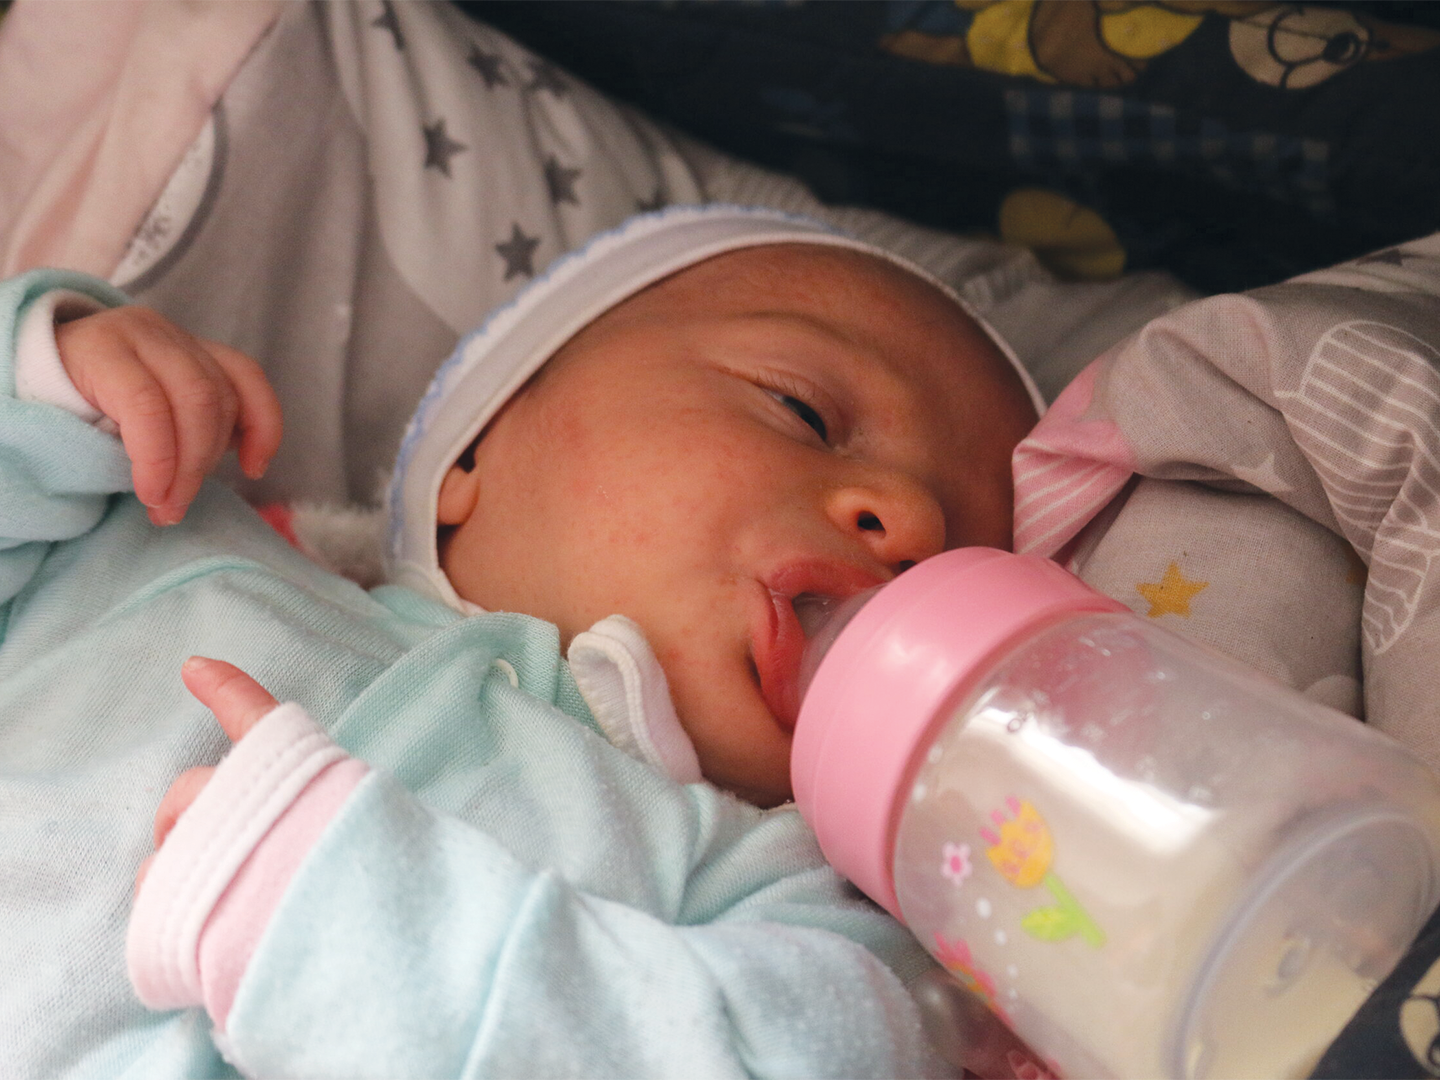 A newborn from Shushi now lives in Kotayk, Aghavnadzor with an elderly woman who opened her home to displaced families